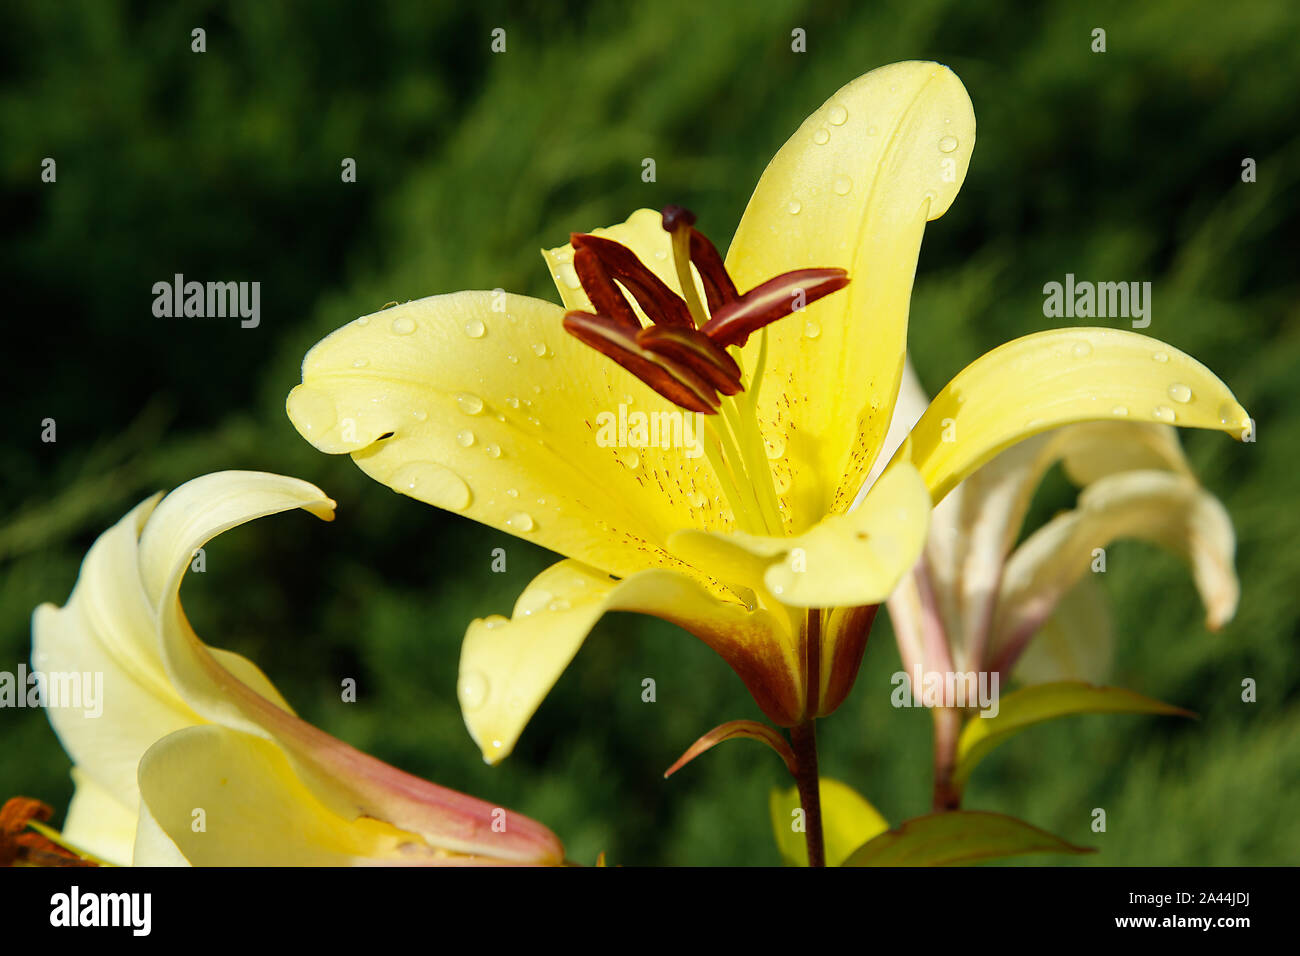 A yellow Lily Bud bloomed in the Park close-up .Texture or background Stock Photo